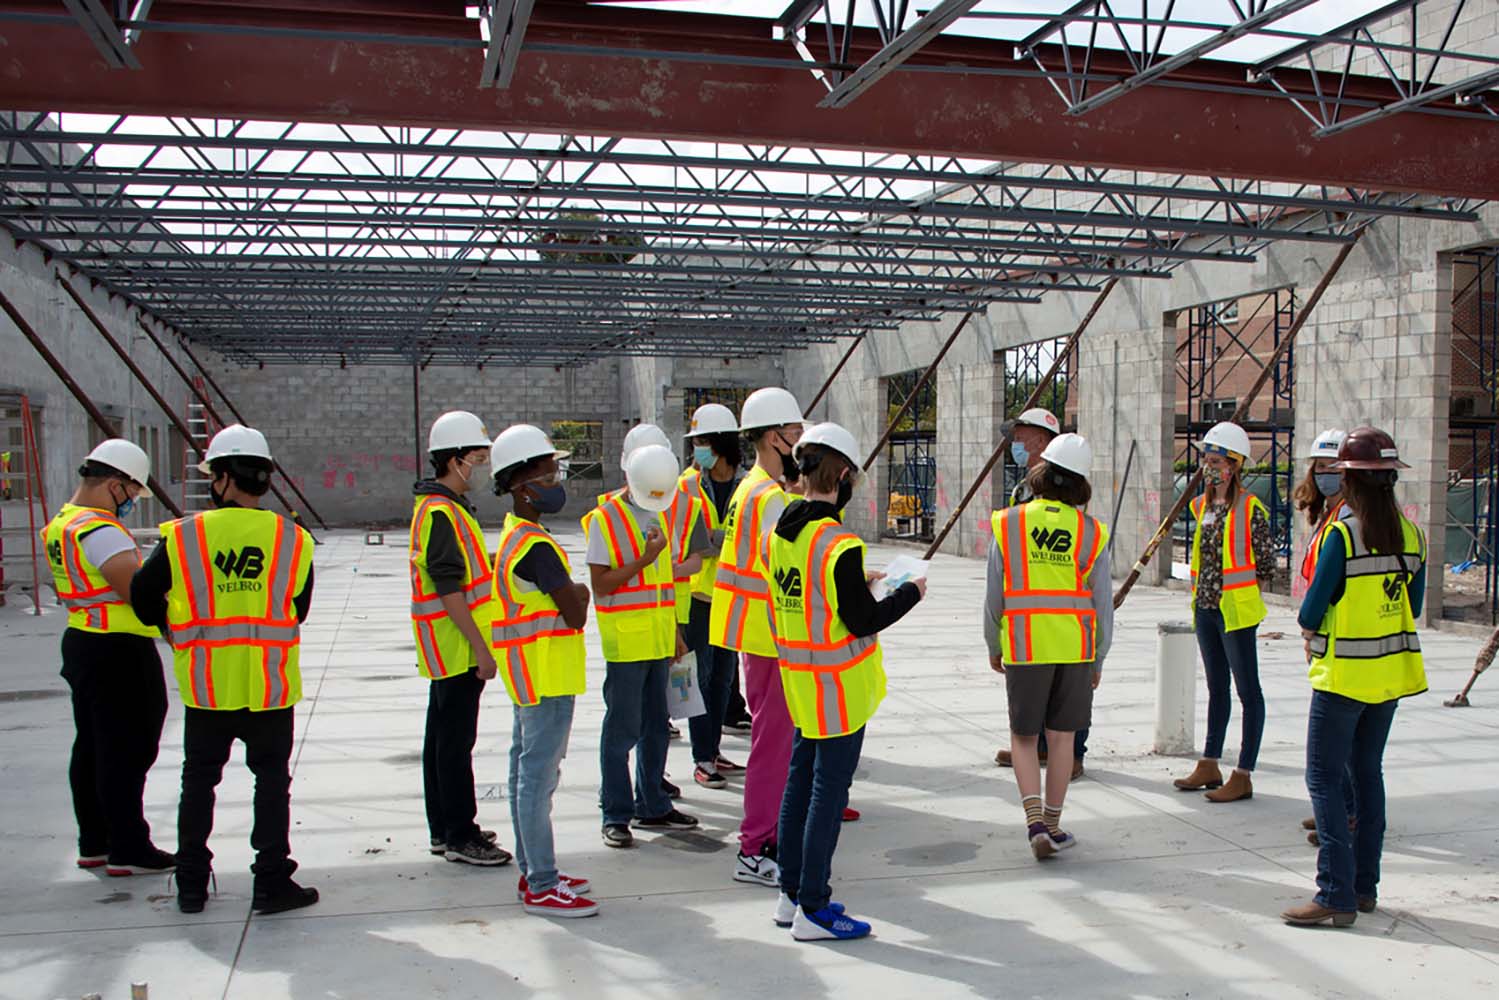 Melbourne employees giving a tour of building during construction